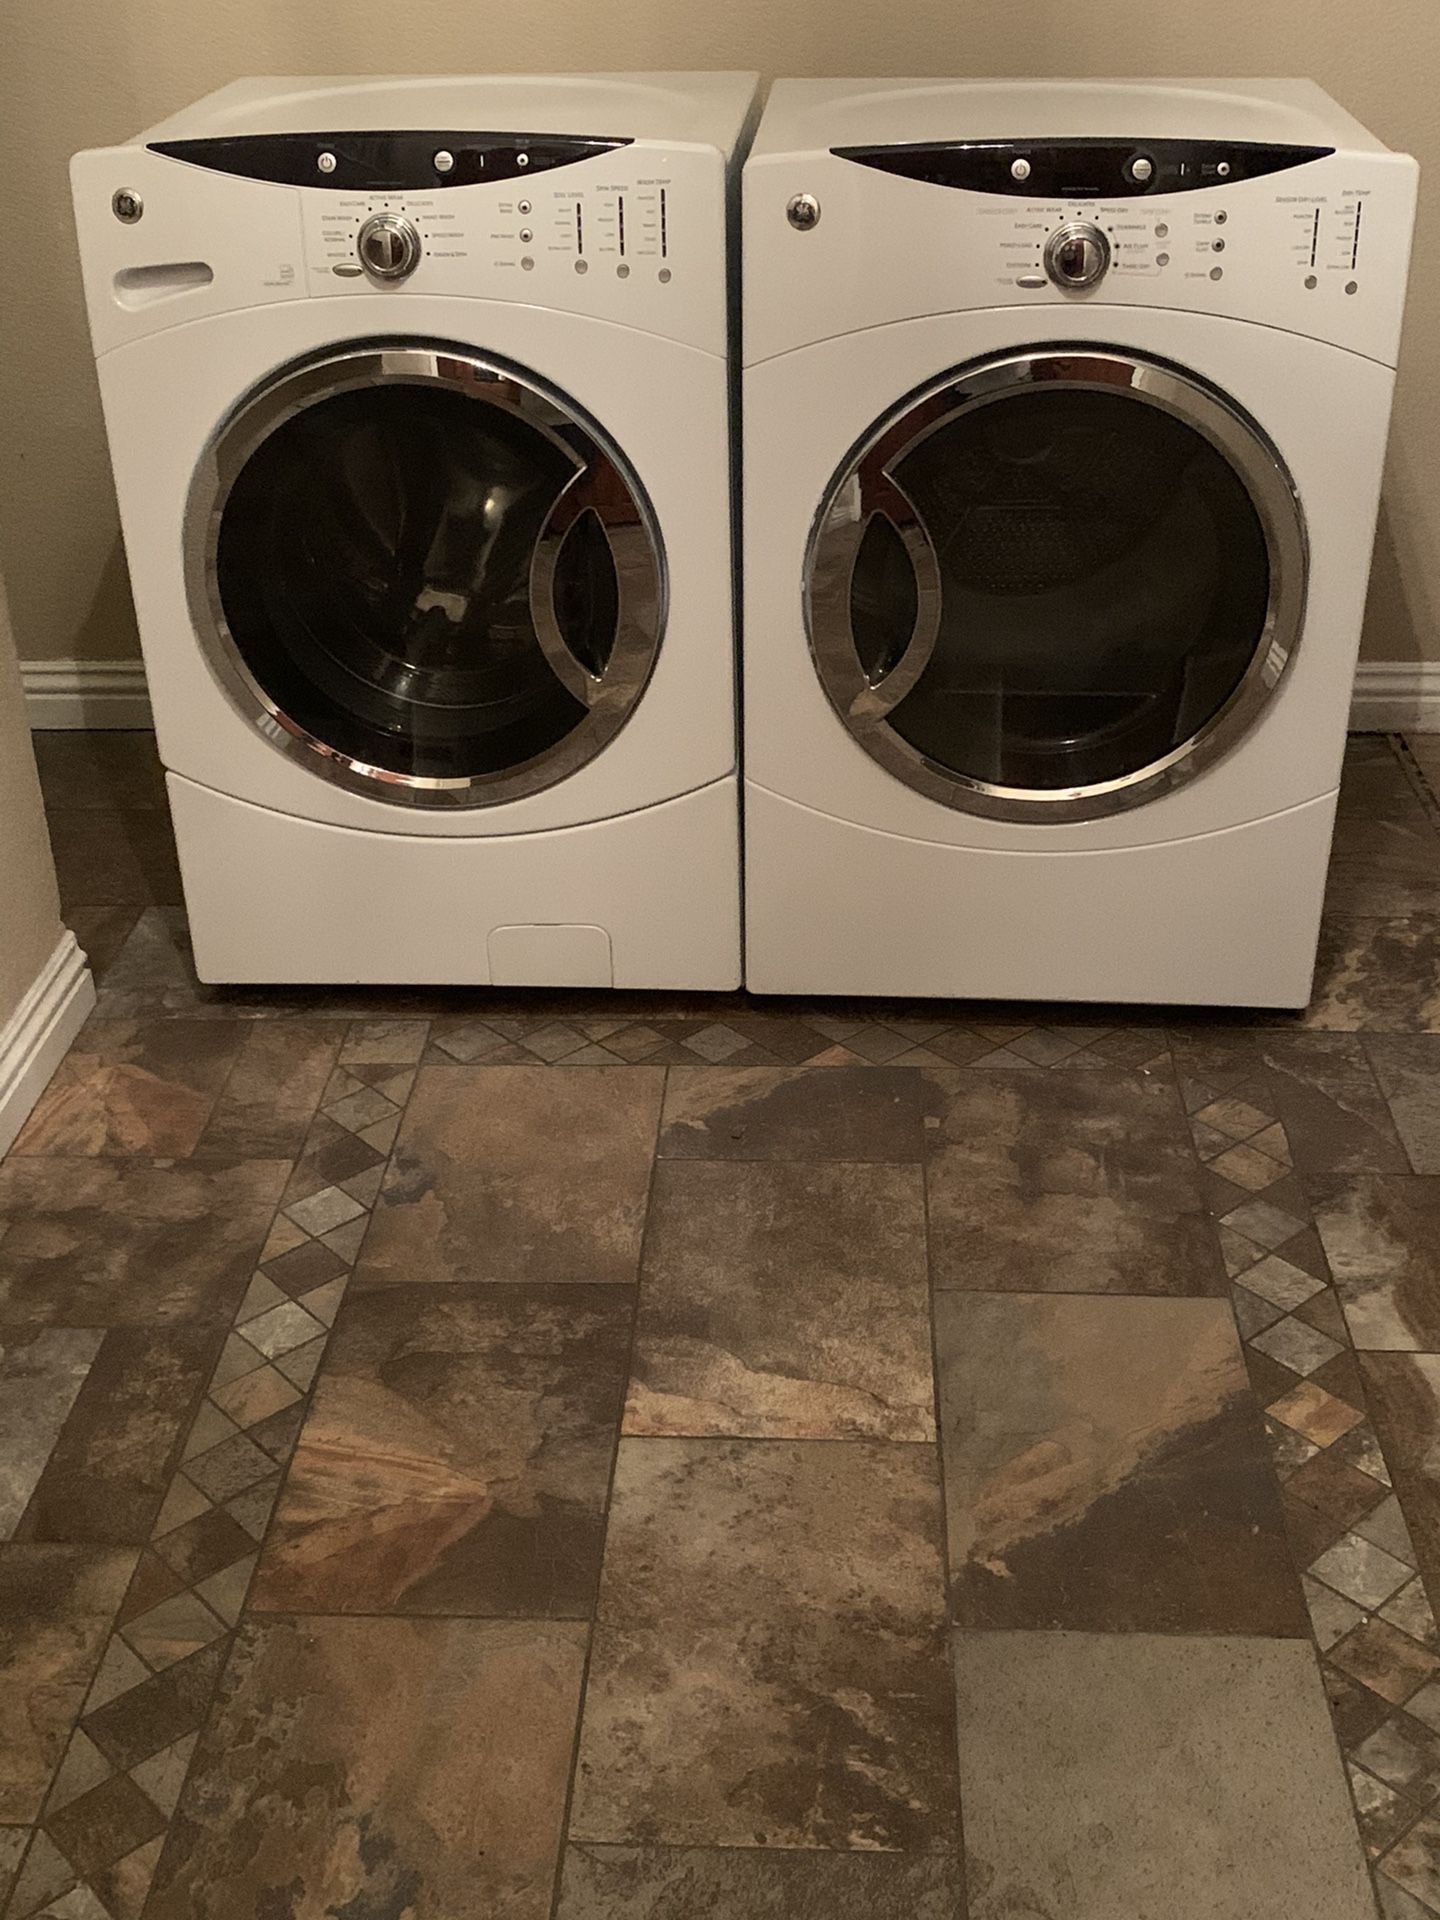 General Electric washer and gas dryer for sale $500.00